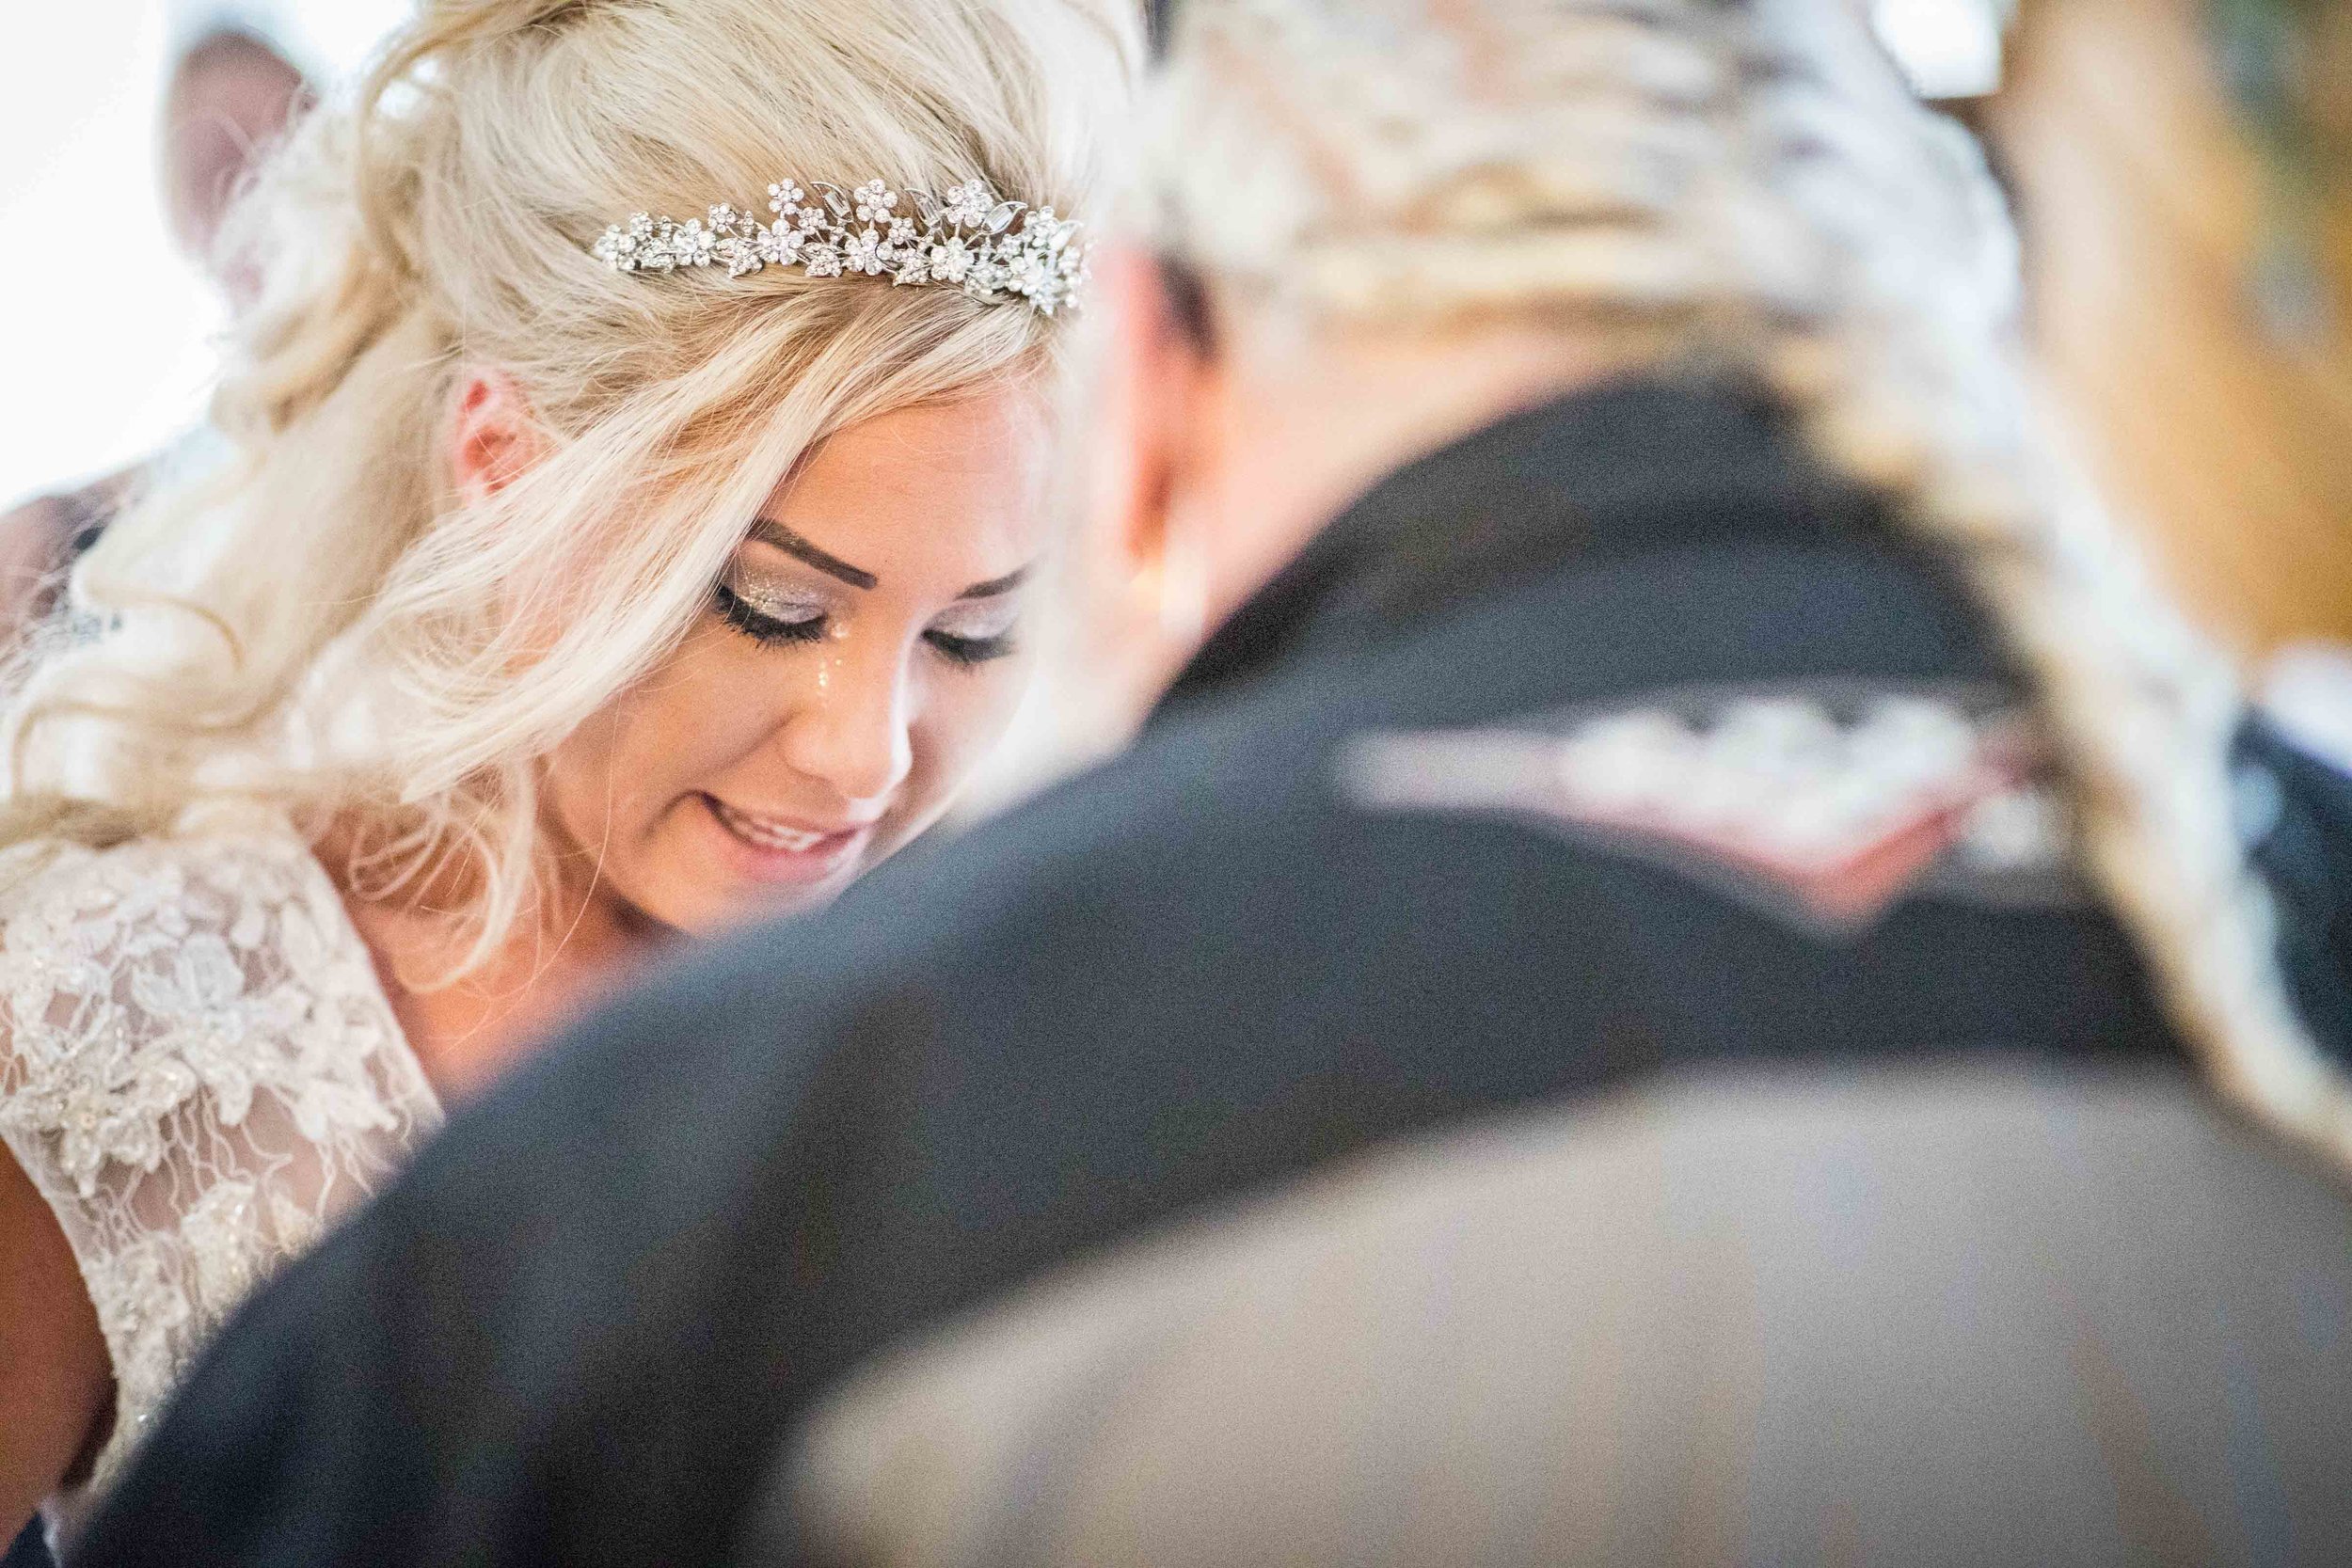  The bride cries as she sees her ill father  